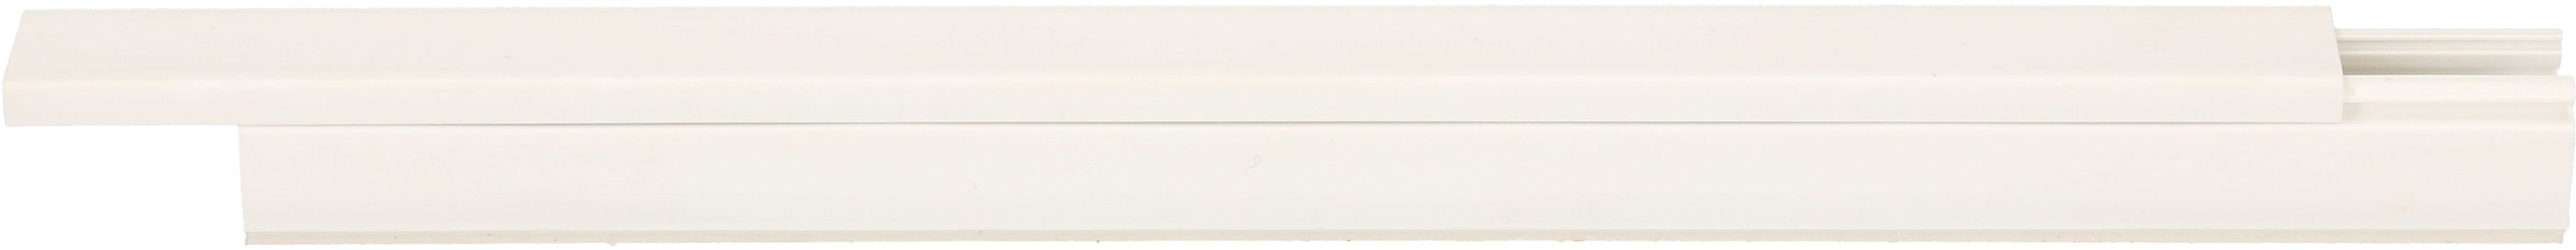 Cable duct white 16x16mm self-adhesive